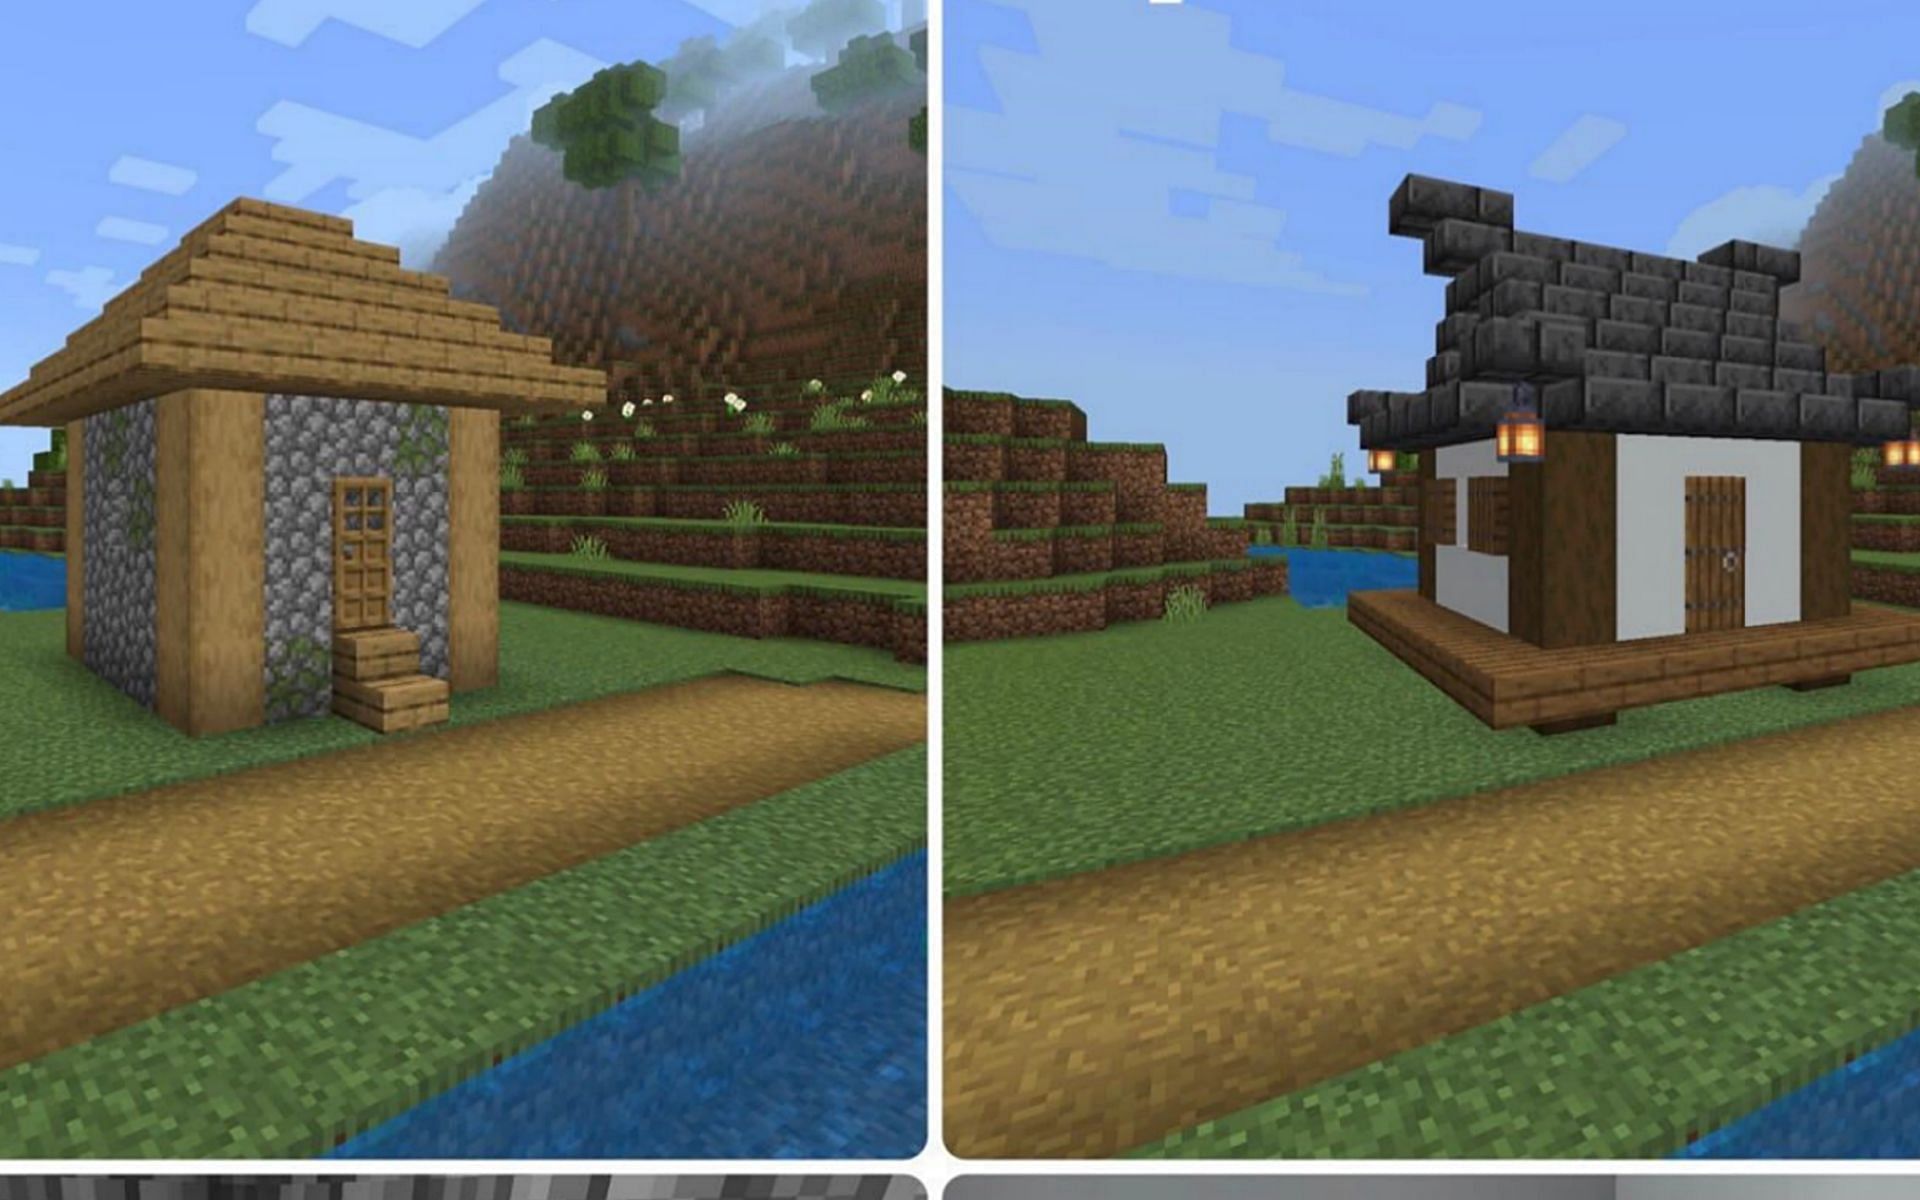 Difference between default village house and Japanese style village house (Image via u/Neaugy Reddit)